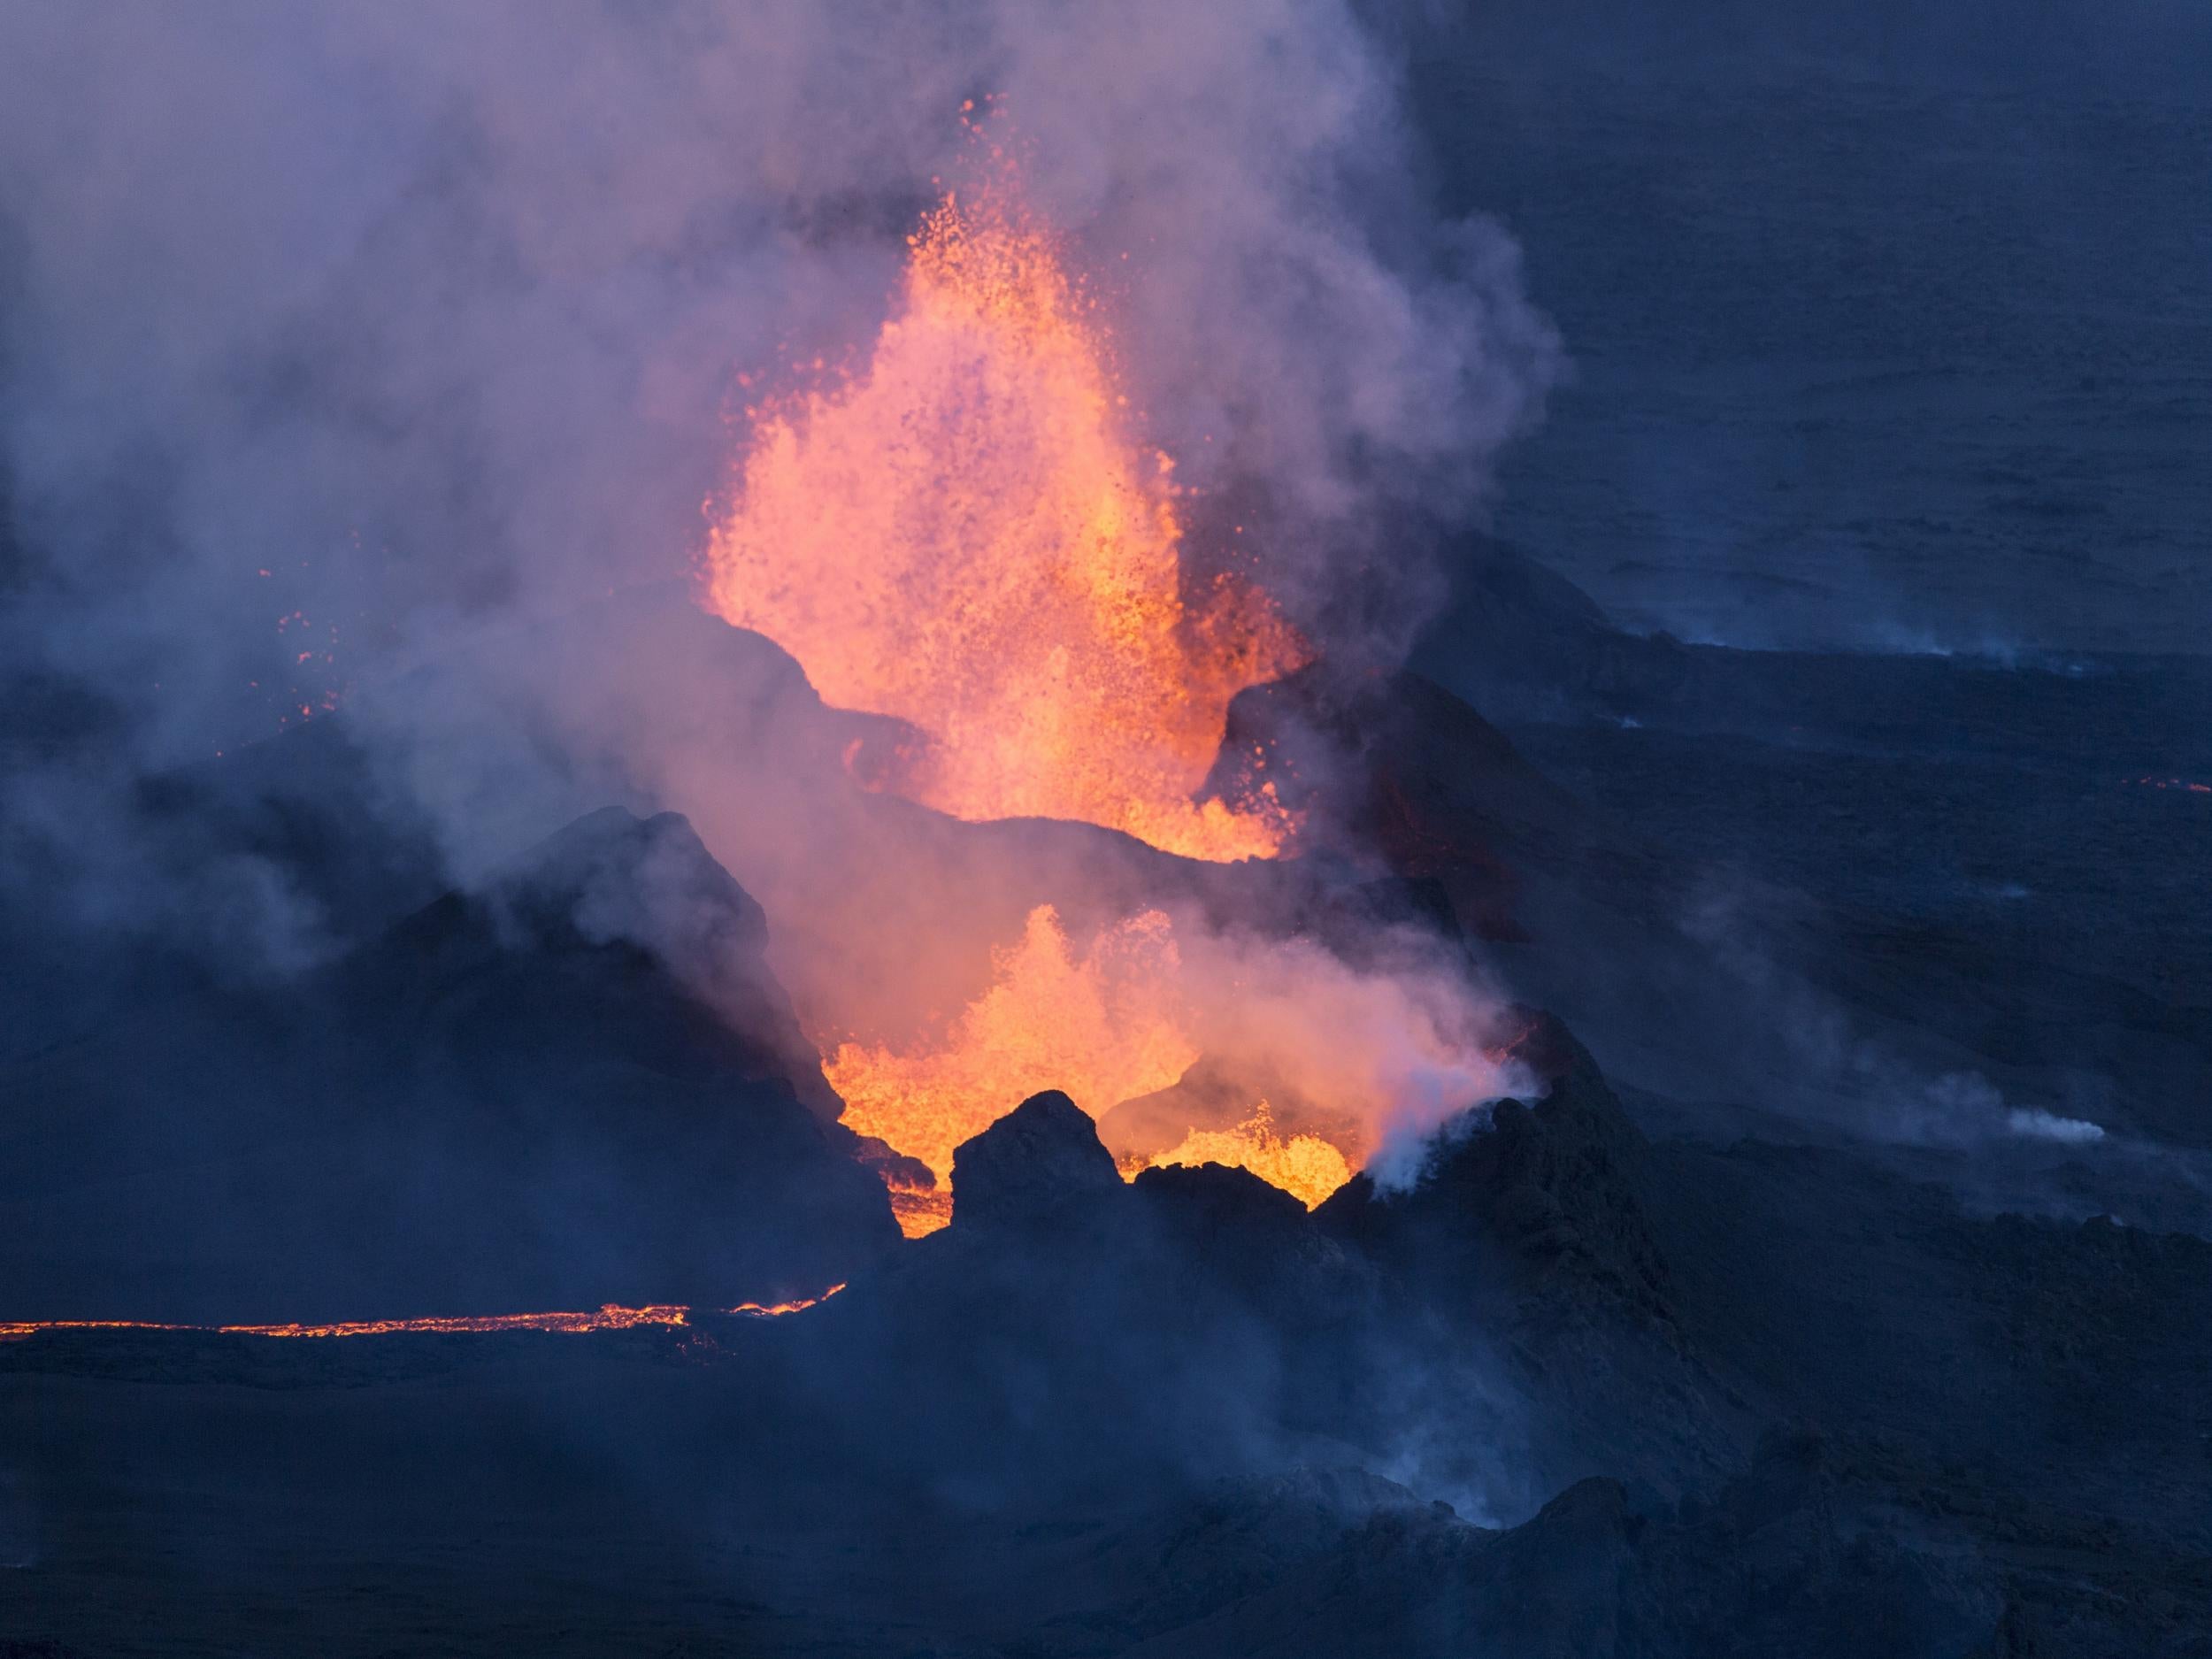 Voluspá: the country's most celebrated medieval poem includes a description of the eruption